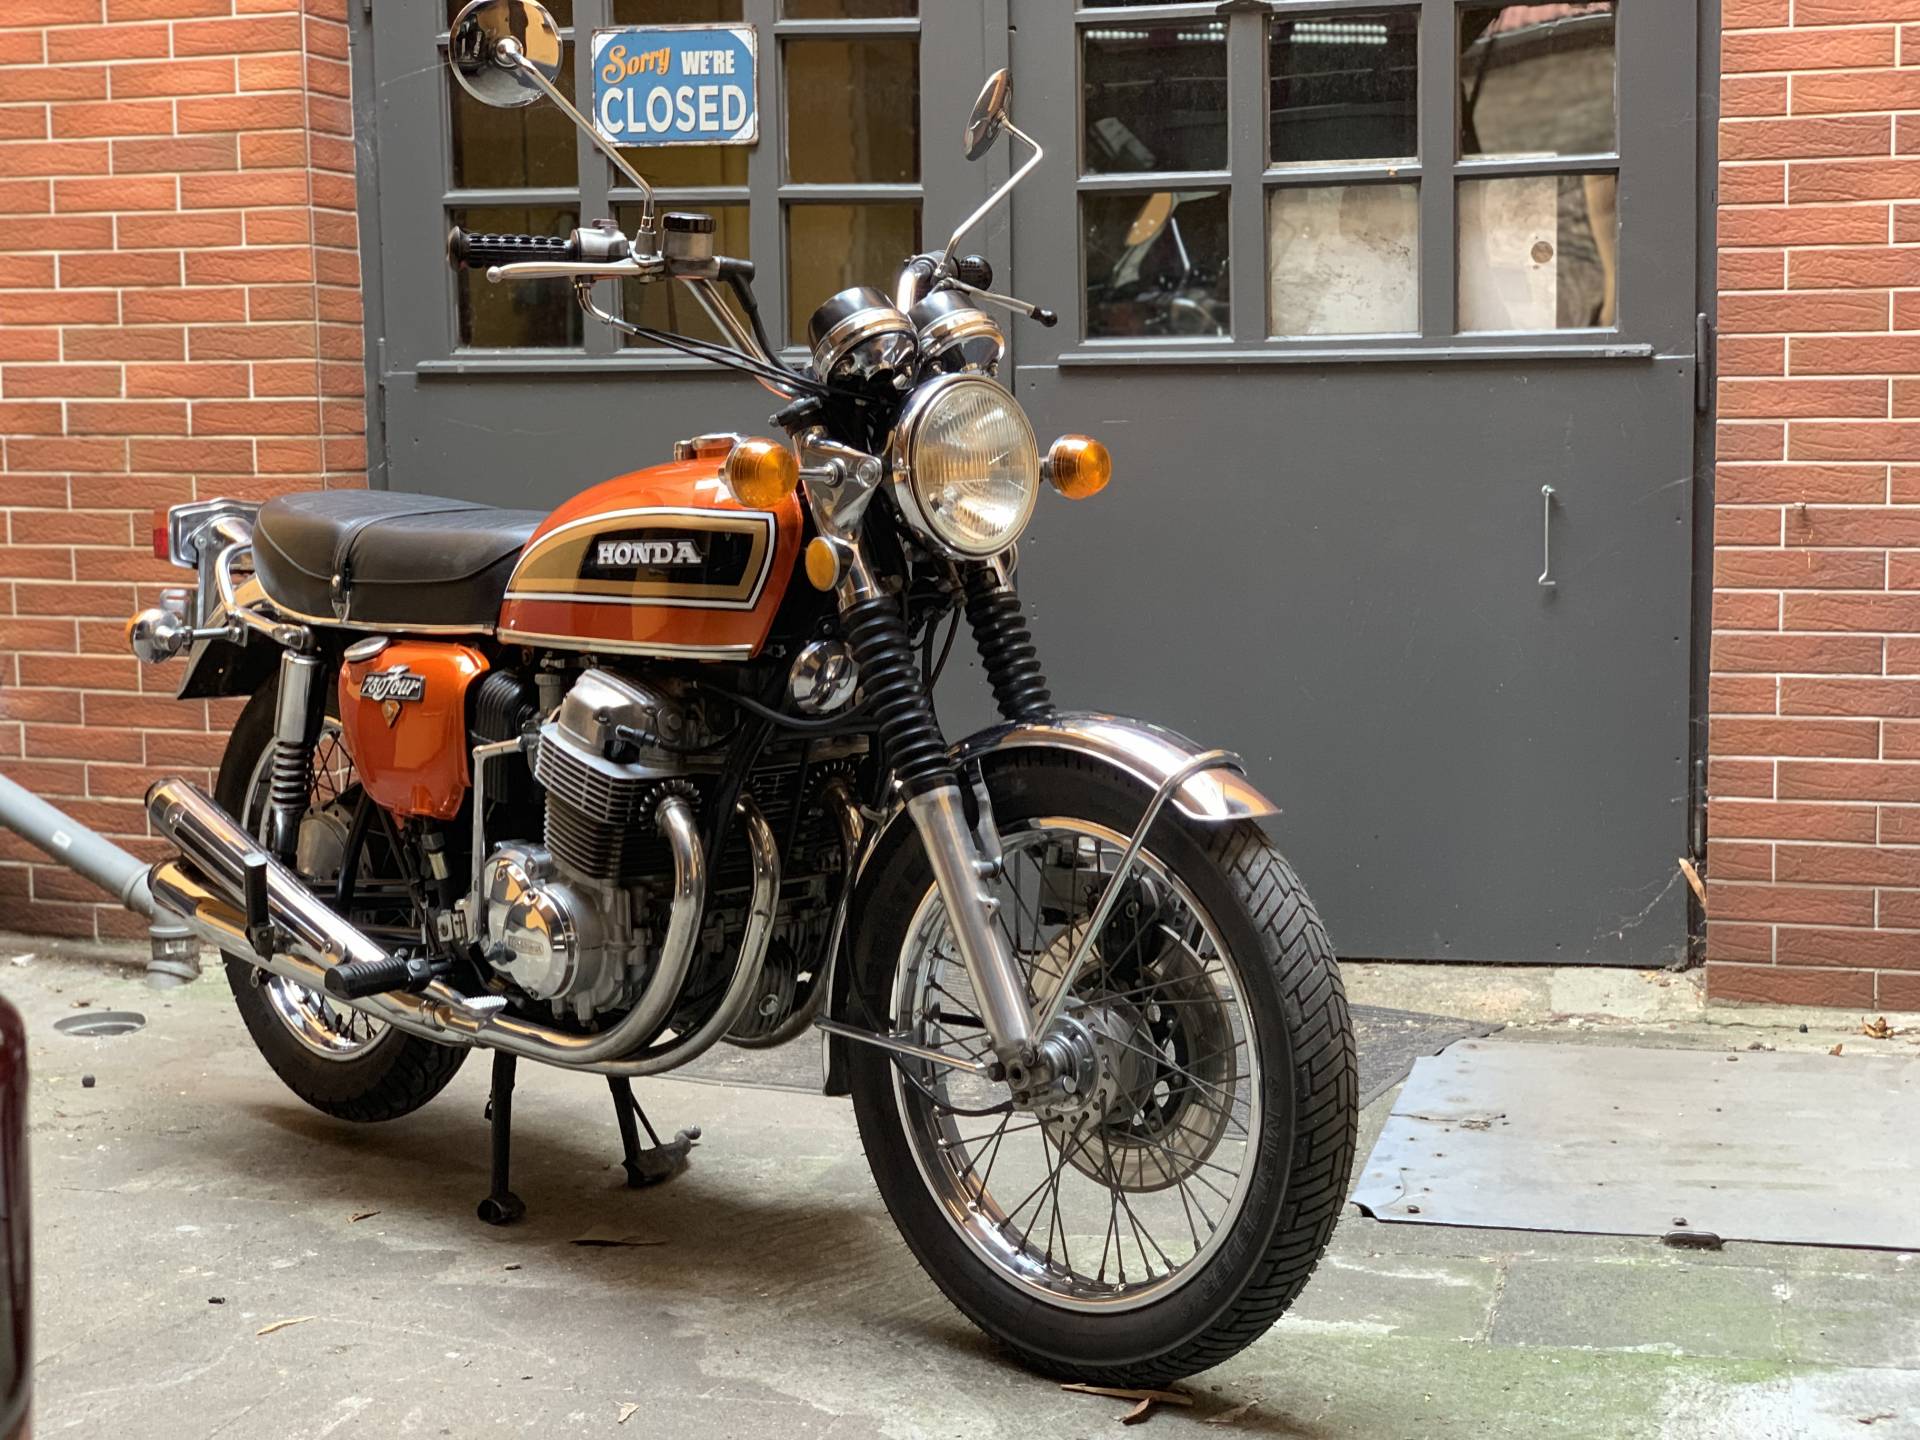 For Sale: Honda CB 750 Four (1977) offered for AUD 12,383